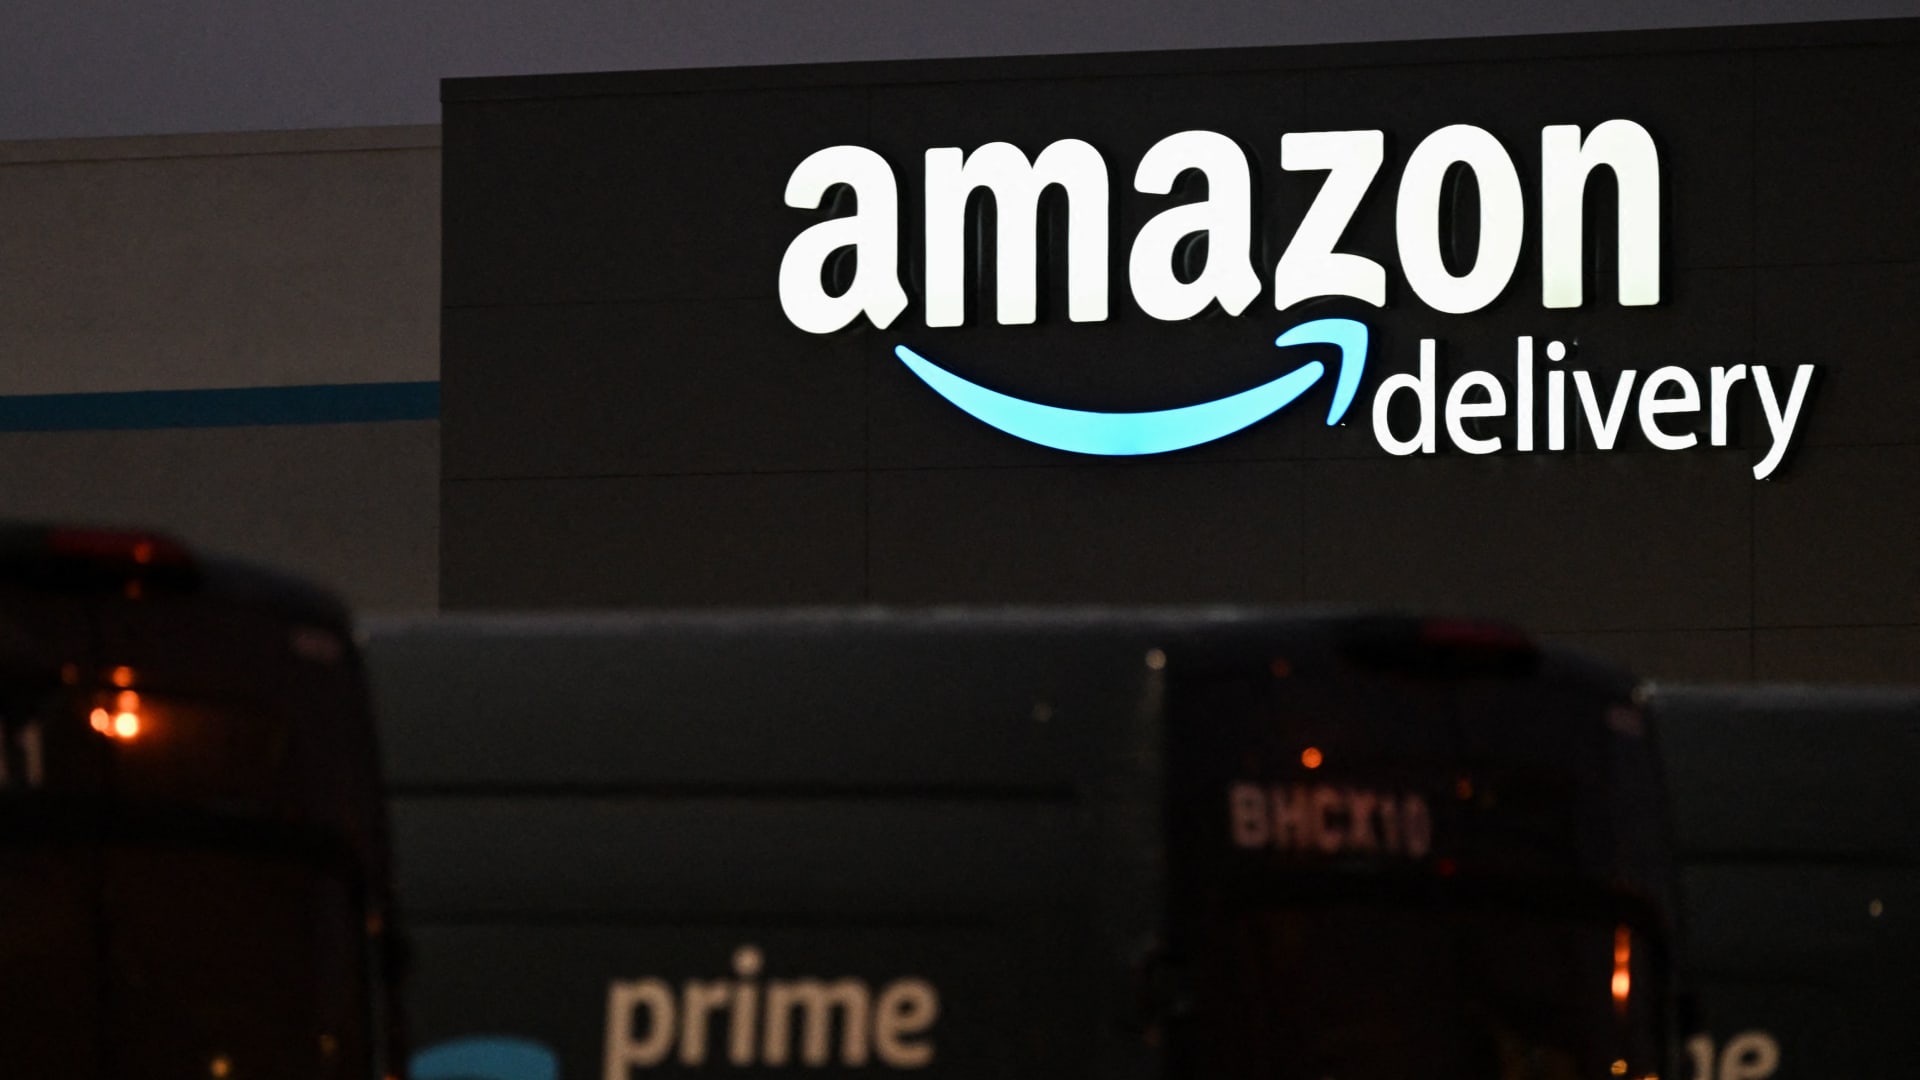 Stocks making the biggest moves after hours: Amazon, Apple, Roku and more